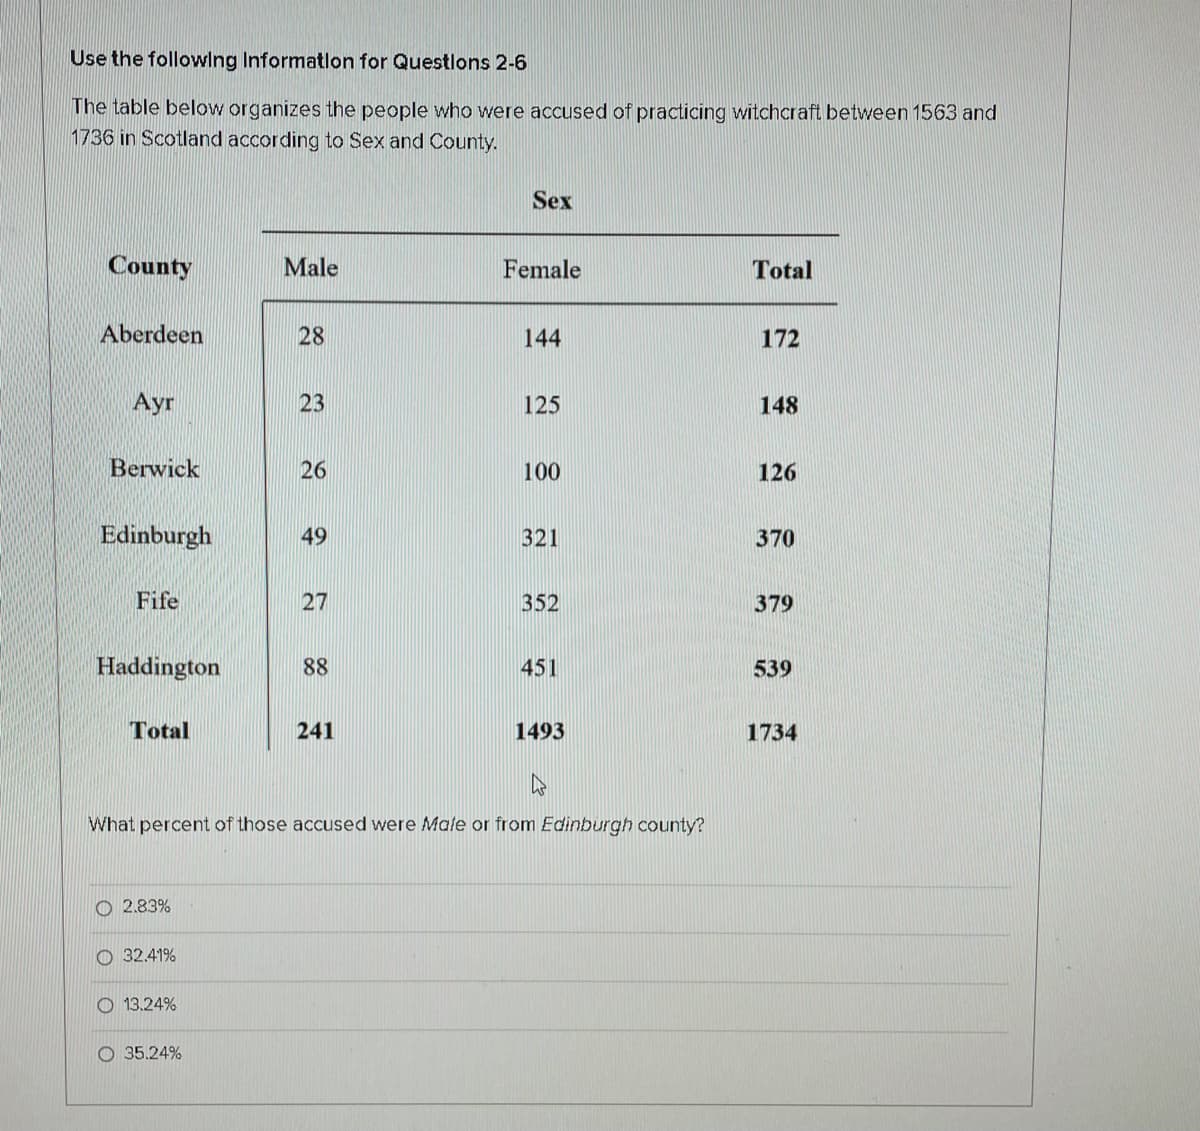 Use the followlng Informatlon for Questlons 2-6
The table below organizes the people who were accused of practicing witchcraft between 1563 and
1736 in Scotland according to Sex and County.
Sex
County
Male
Female
Total
Aberdeen
28
144
172
Ayr
23
125
148
Berwick
26
100
126
Edinburgh
49
321
370
Fife
27
352
379
Haddington
88
451
539
Total
241
1493
1734
What percent of those accused were Male or from Edinburgh county?
O 2.83%
O 32.41%
O 13.24%
O 35.24%
